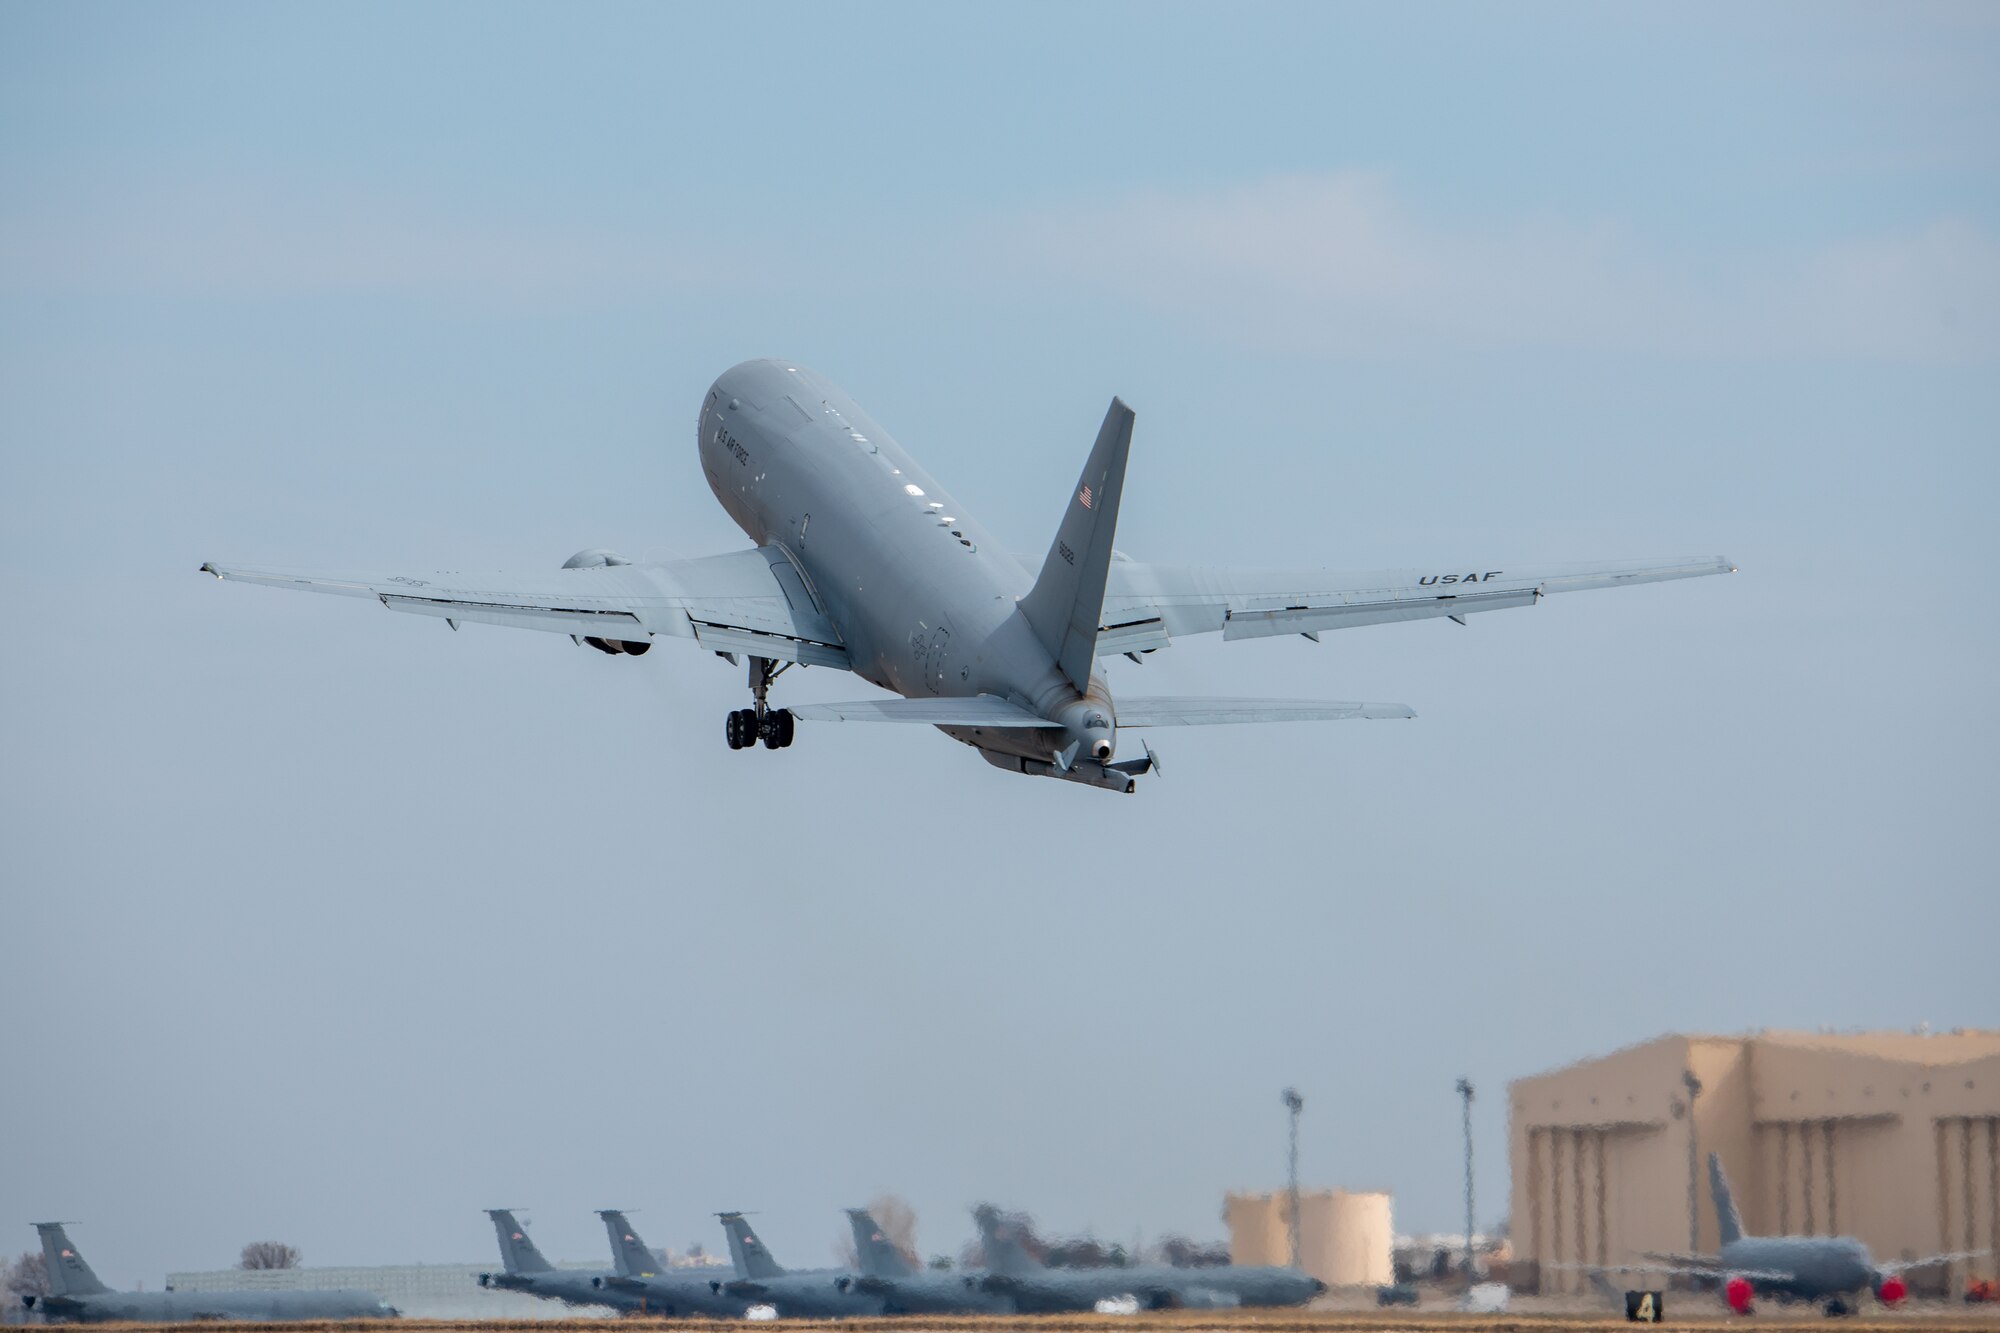 A KC-46A Pegasus takes off during Exercise Lethal Pride March 27, 2023, at McConnell Air Force Base, Kansas. Aircrews from the 22nd Air Refueling Wing and the 931st Air Refueling Wing performed an elephant walk and aircraft flush as part of the exercise. (U.S. Air Force Photo by Airman Gavin Hameed)